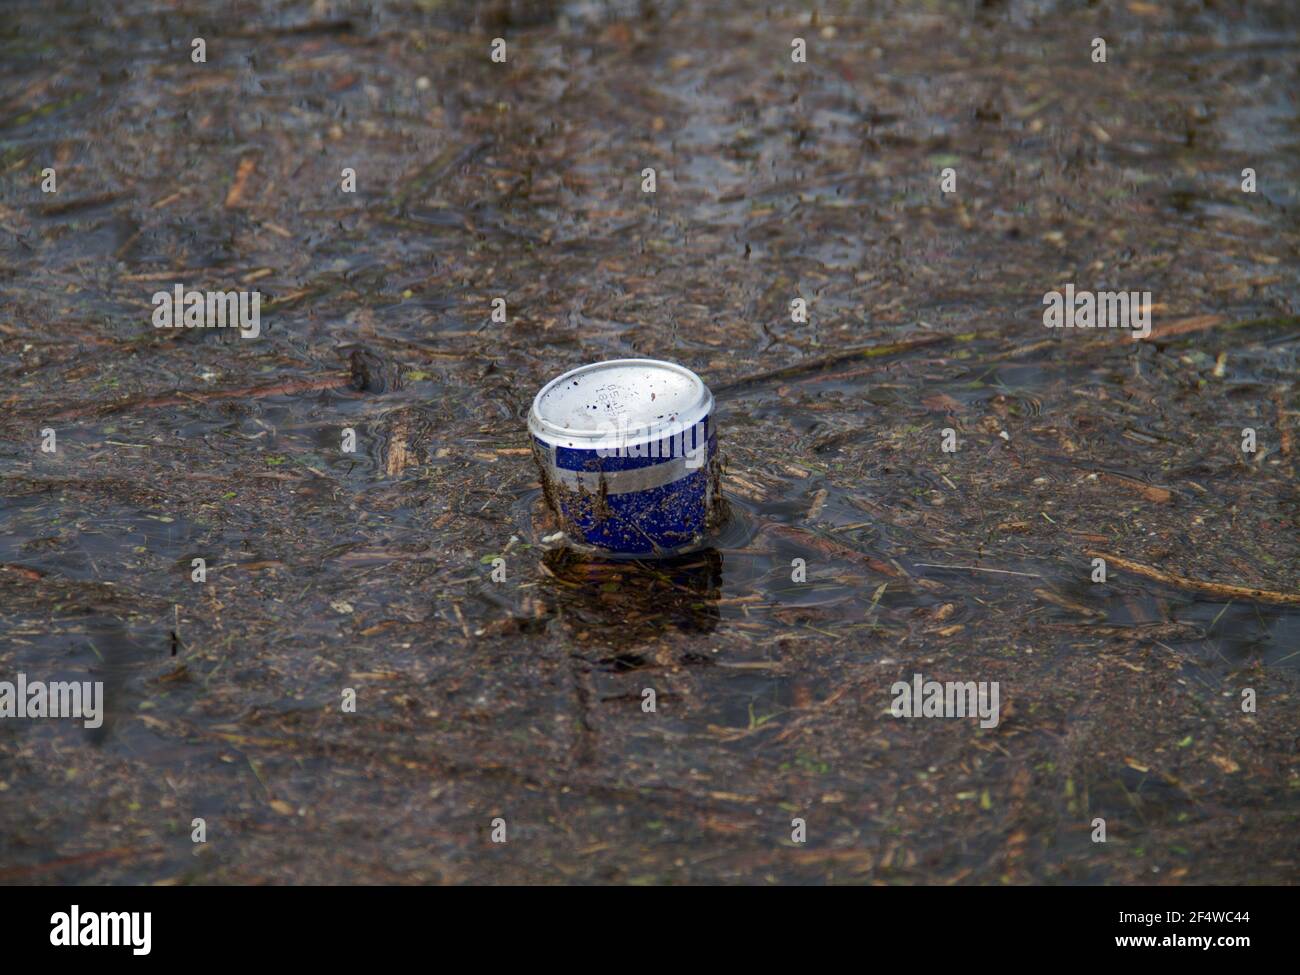 Carelessly discarded soda can floating in the water between plant debris Stock Photo